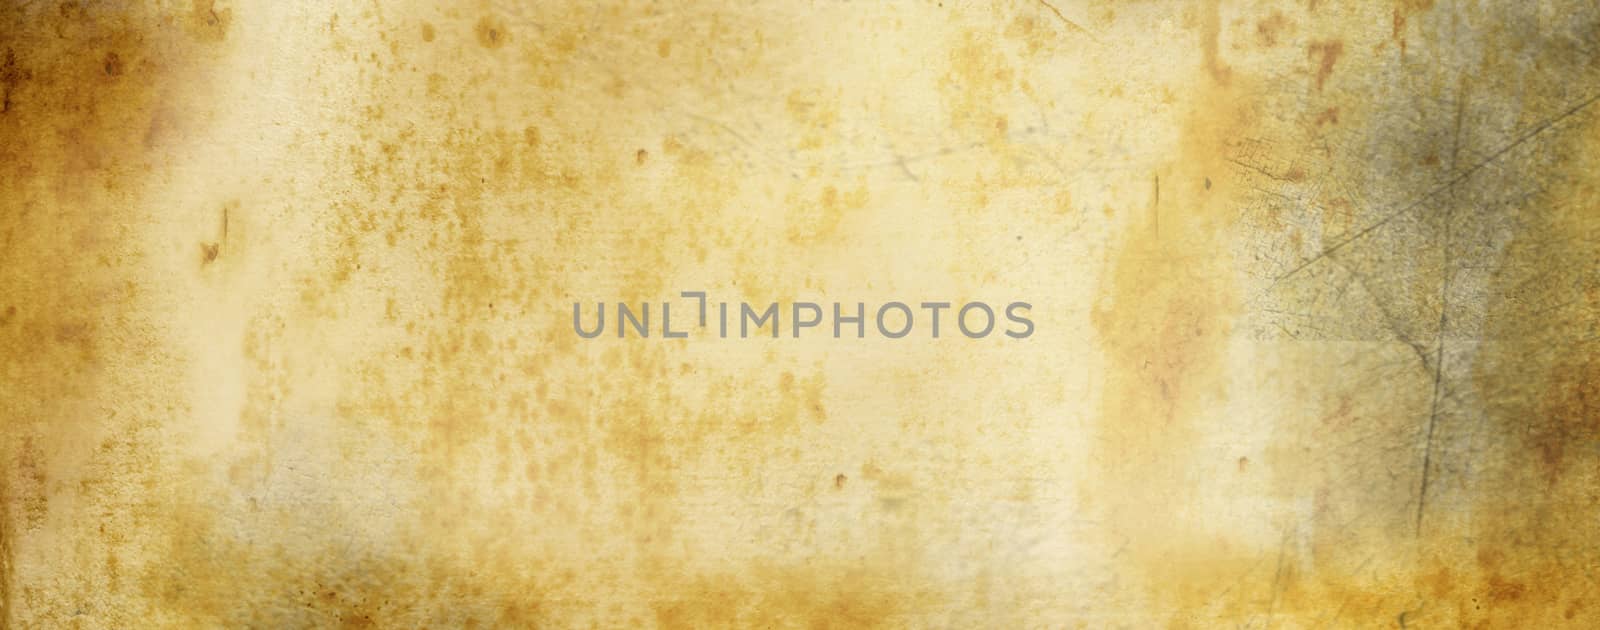 paper stained background with ink by photobeps